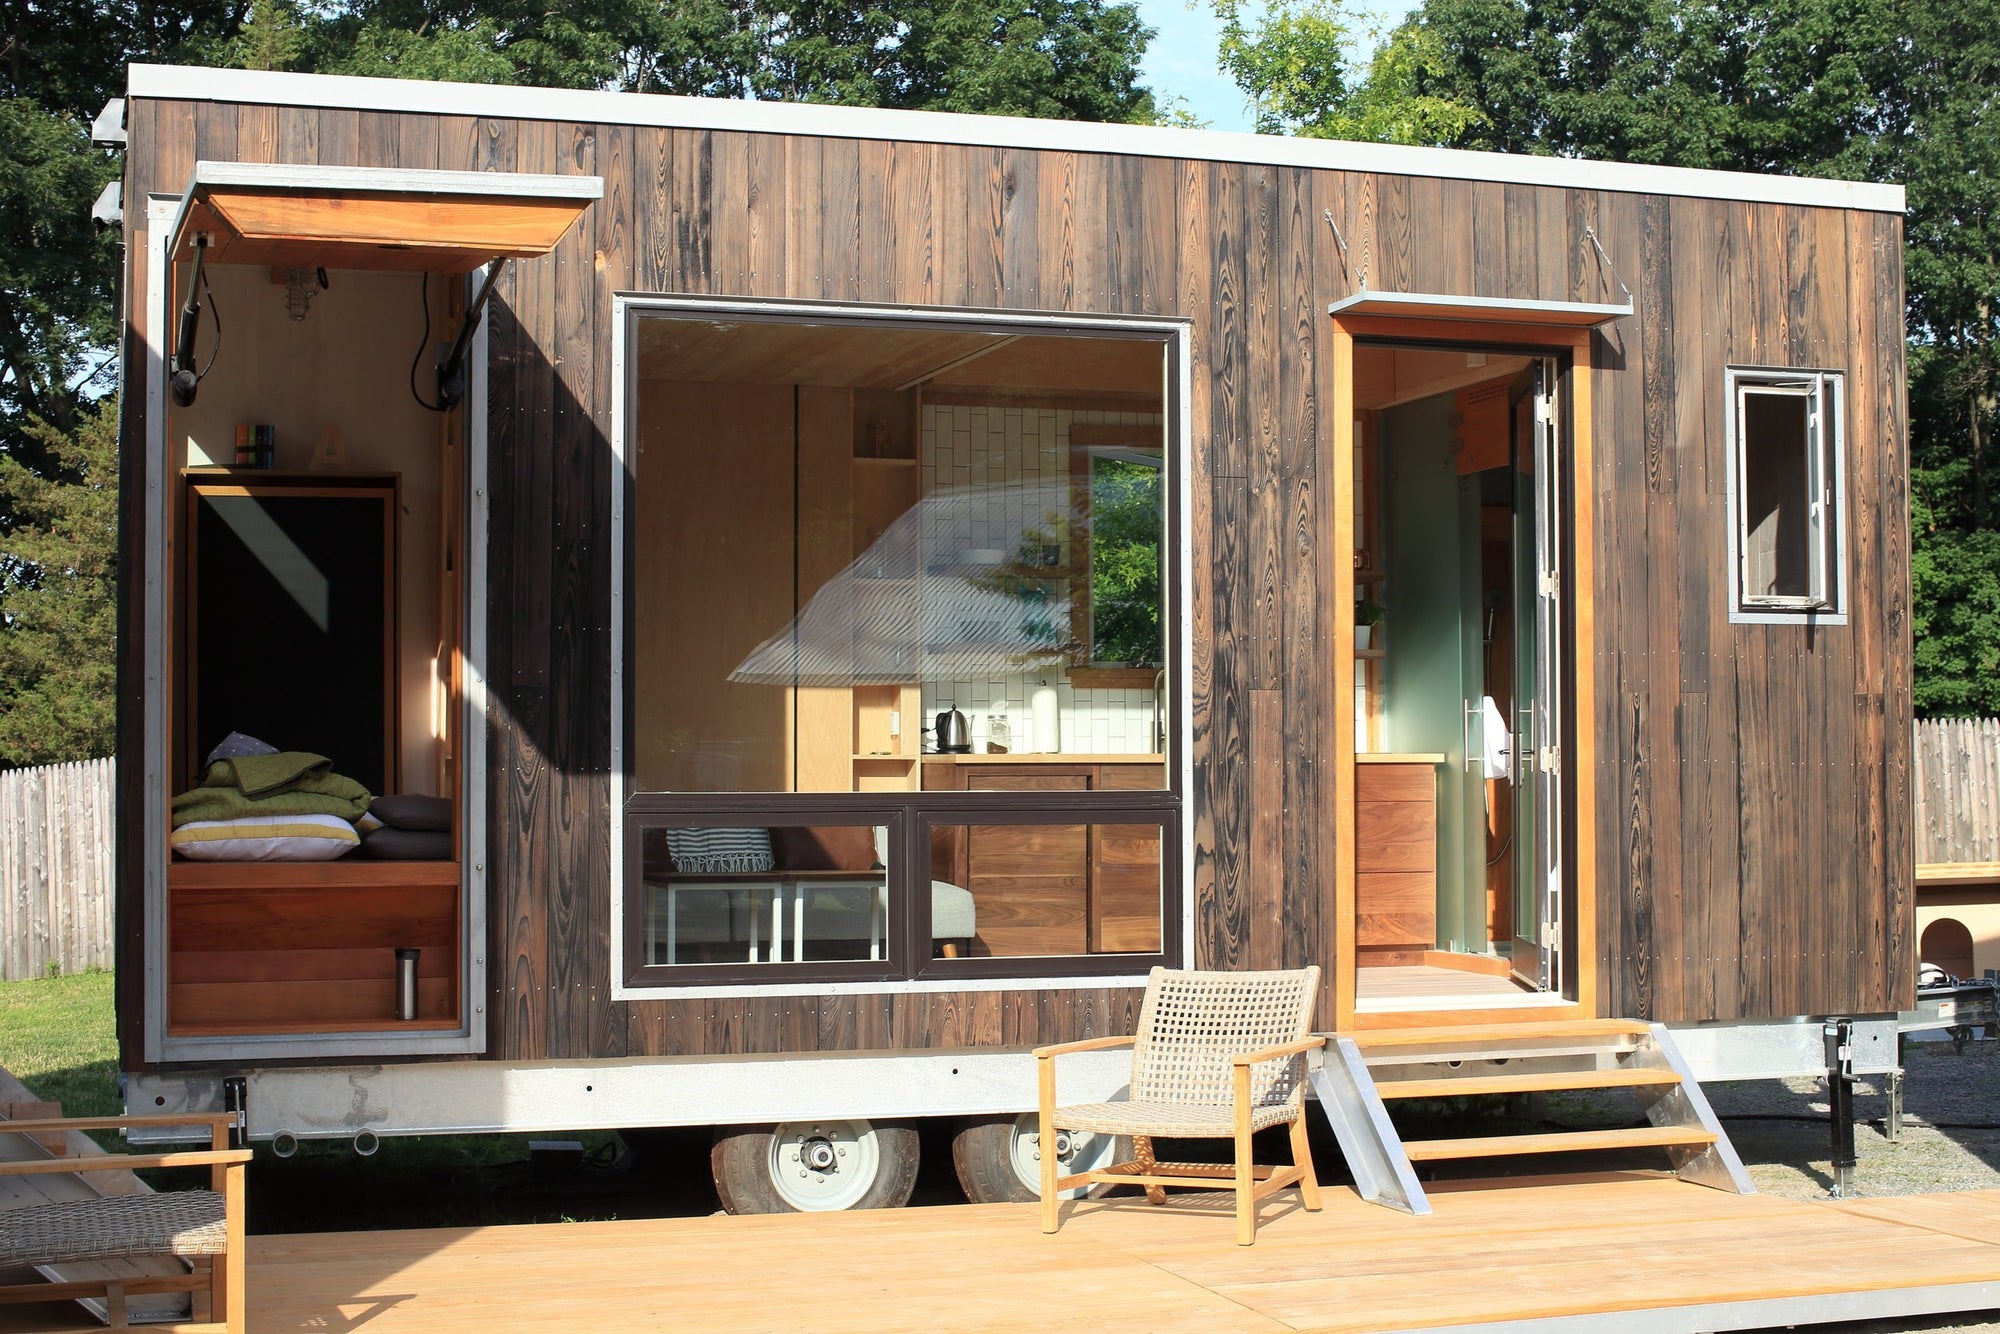 The 21’ Space-Saving “Sturgis” Tiny Home by Cubist Engineering